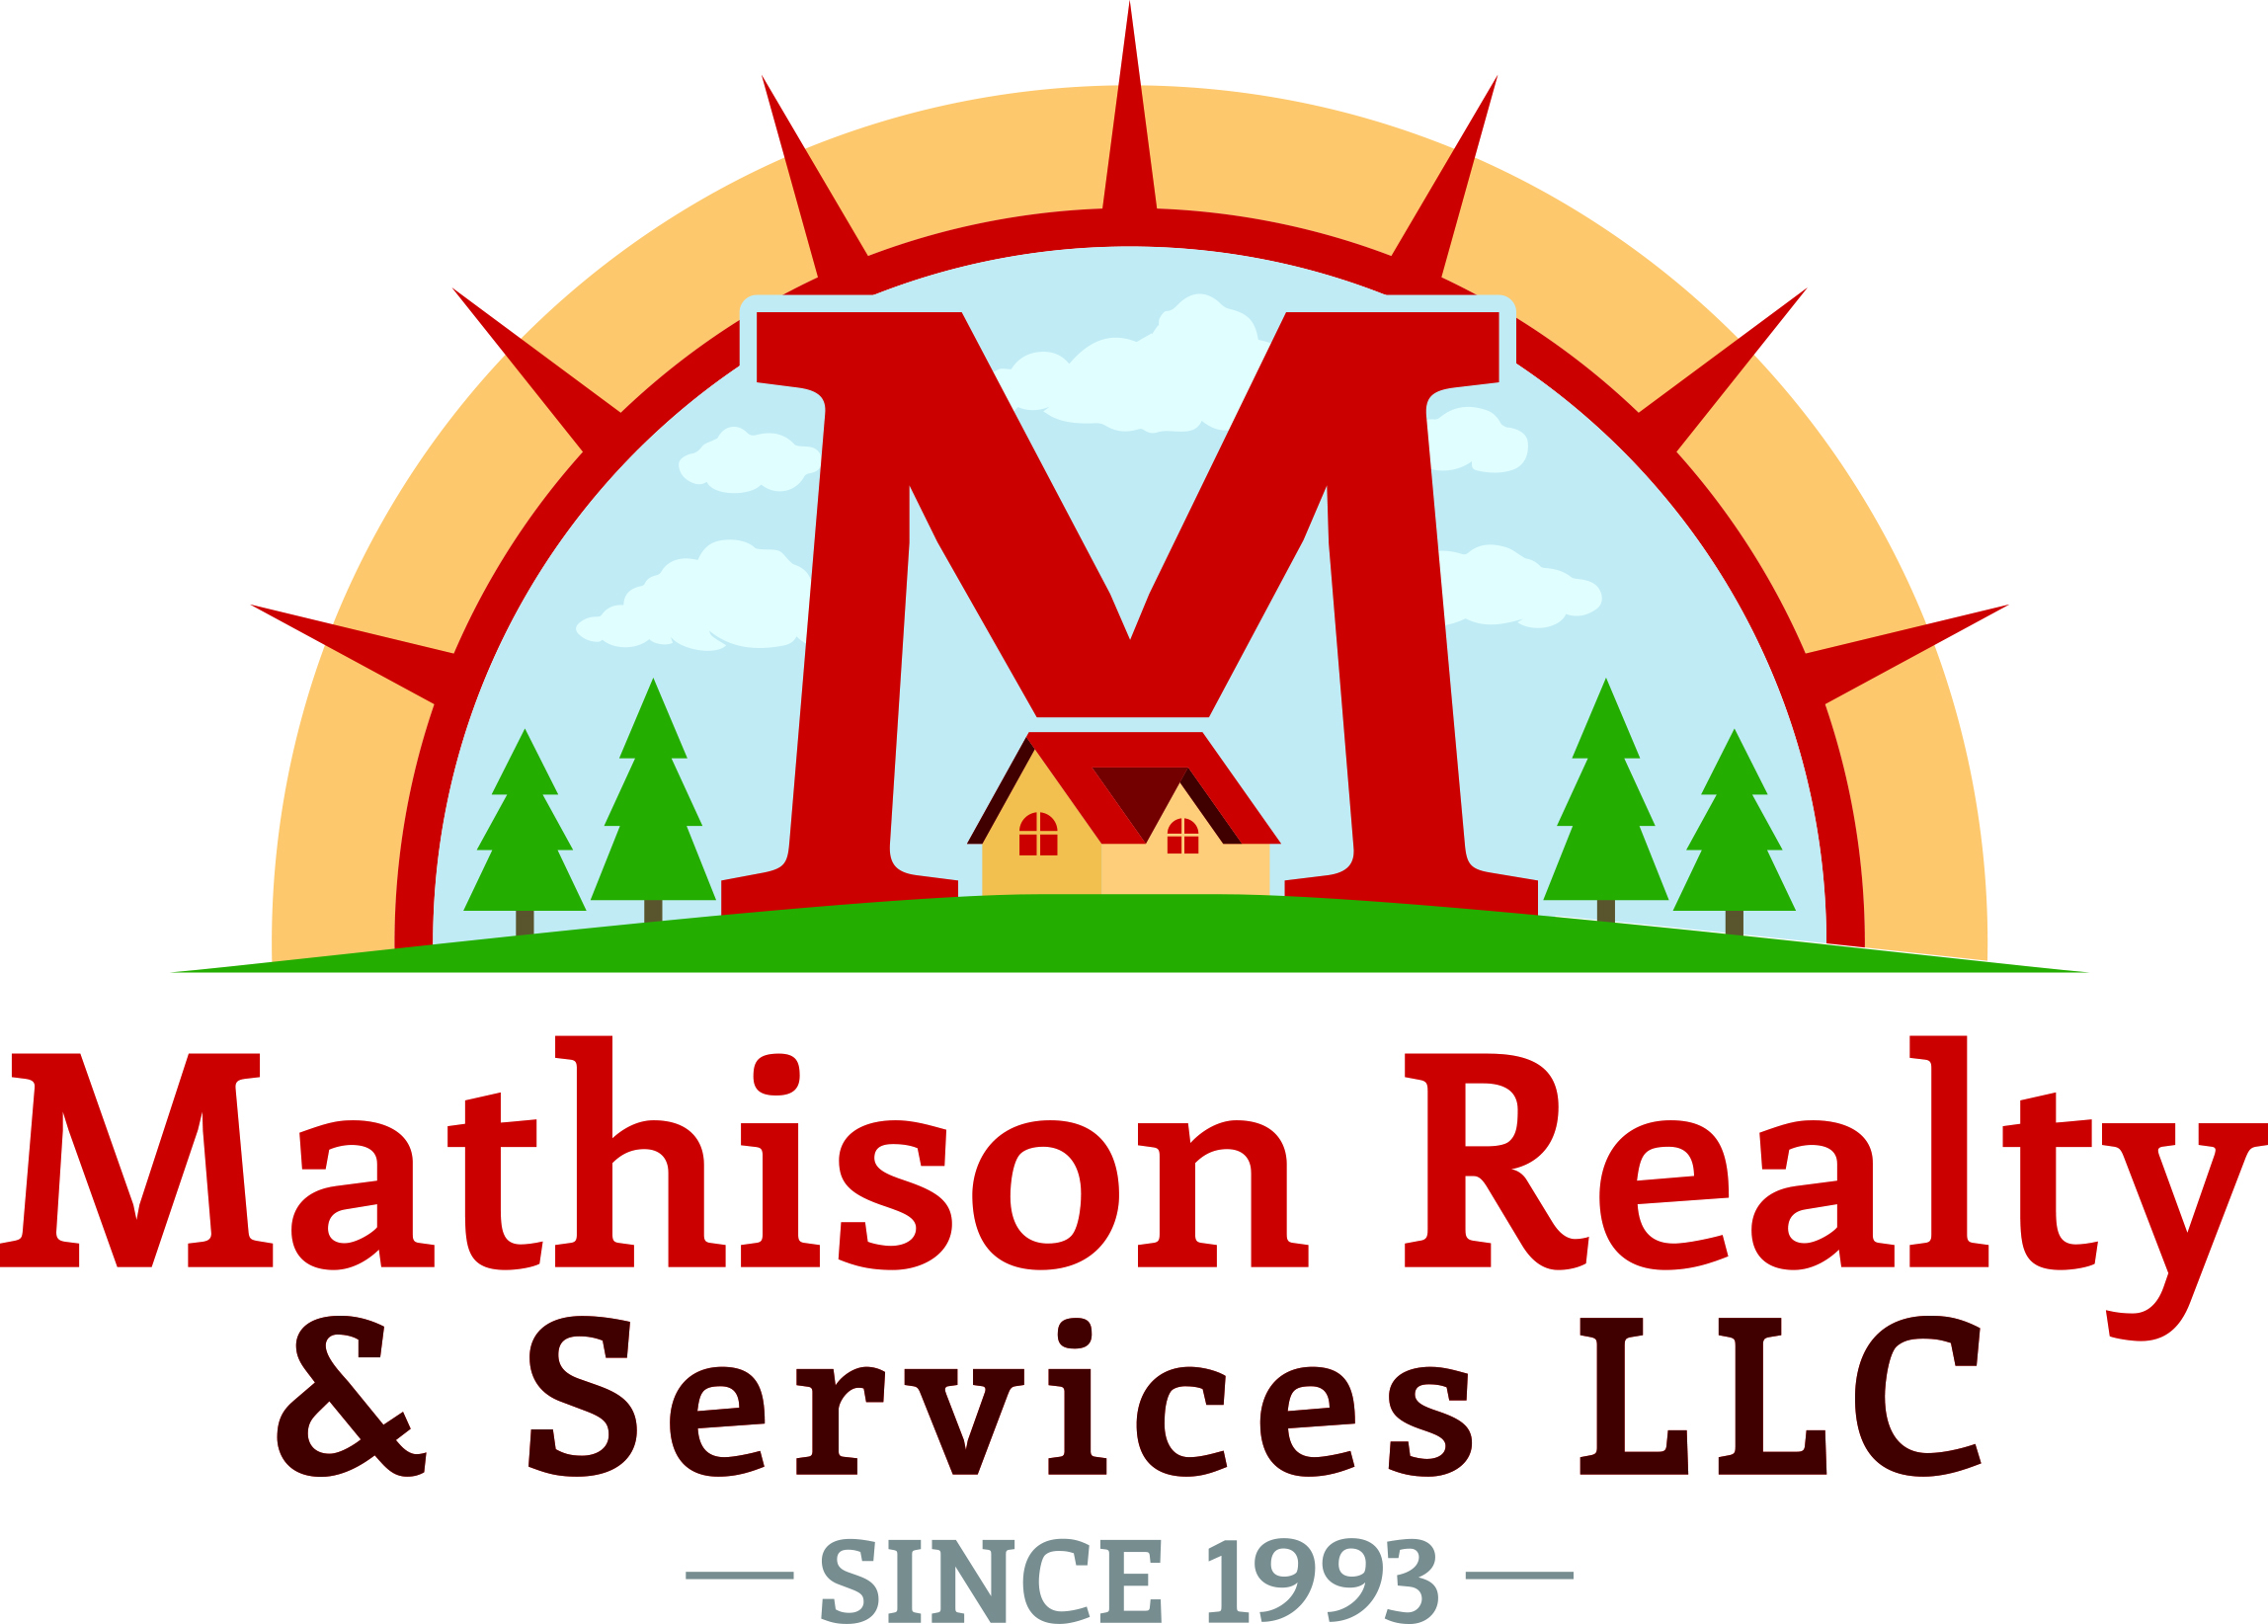 Mathison Realty & Services LLC